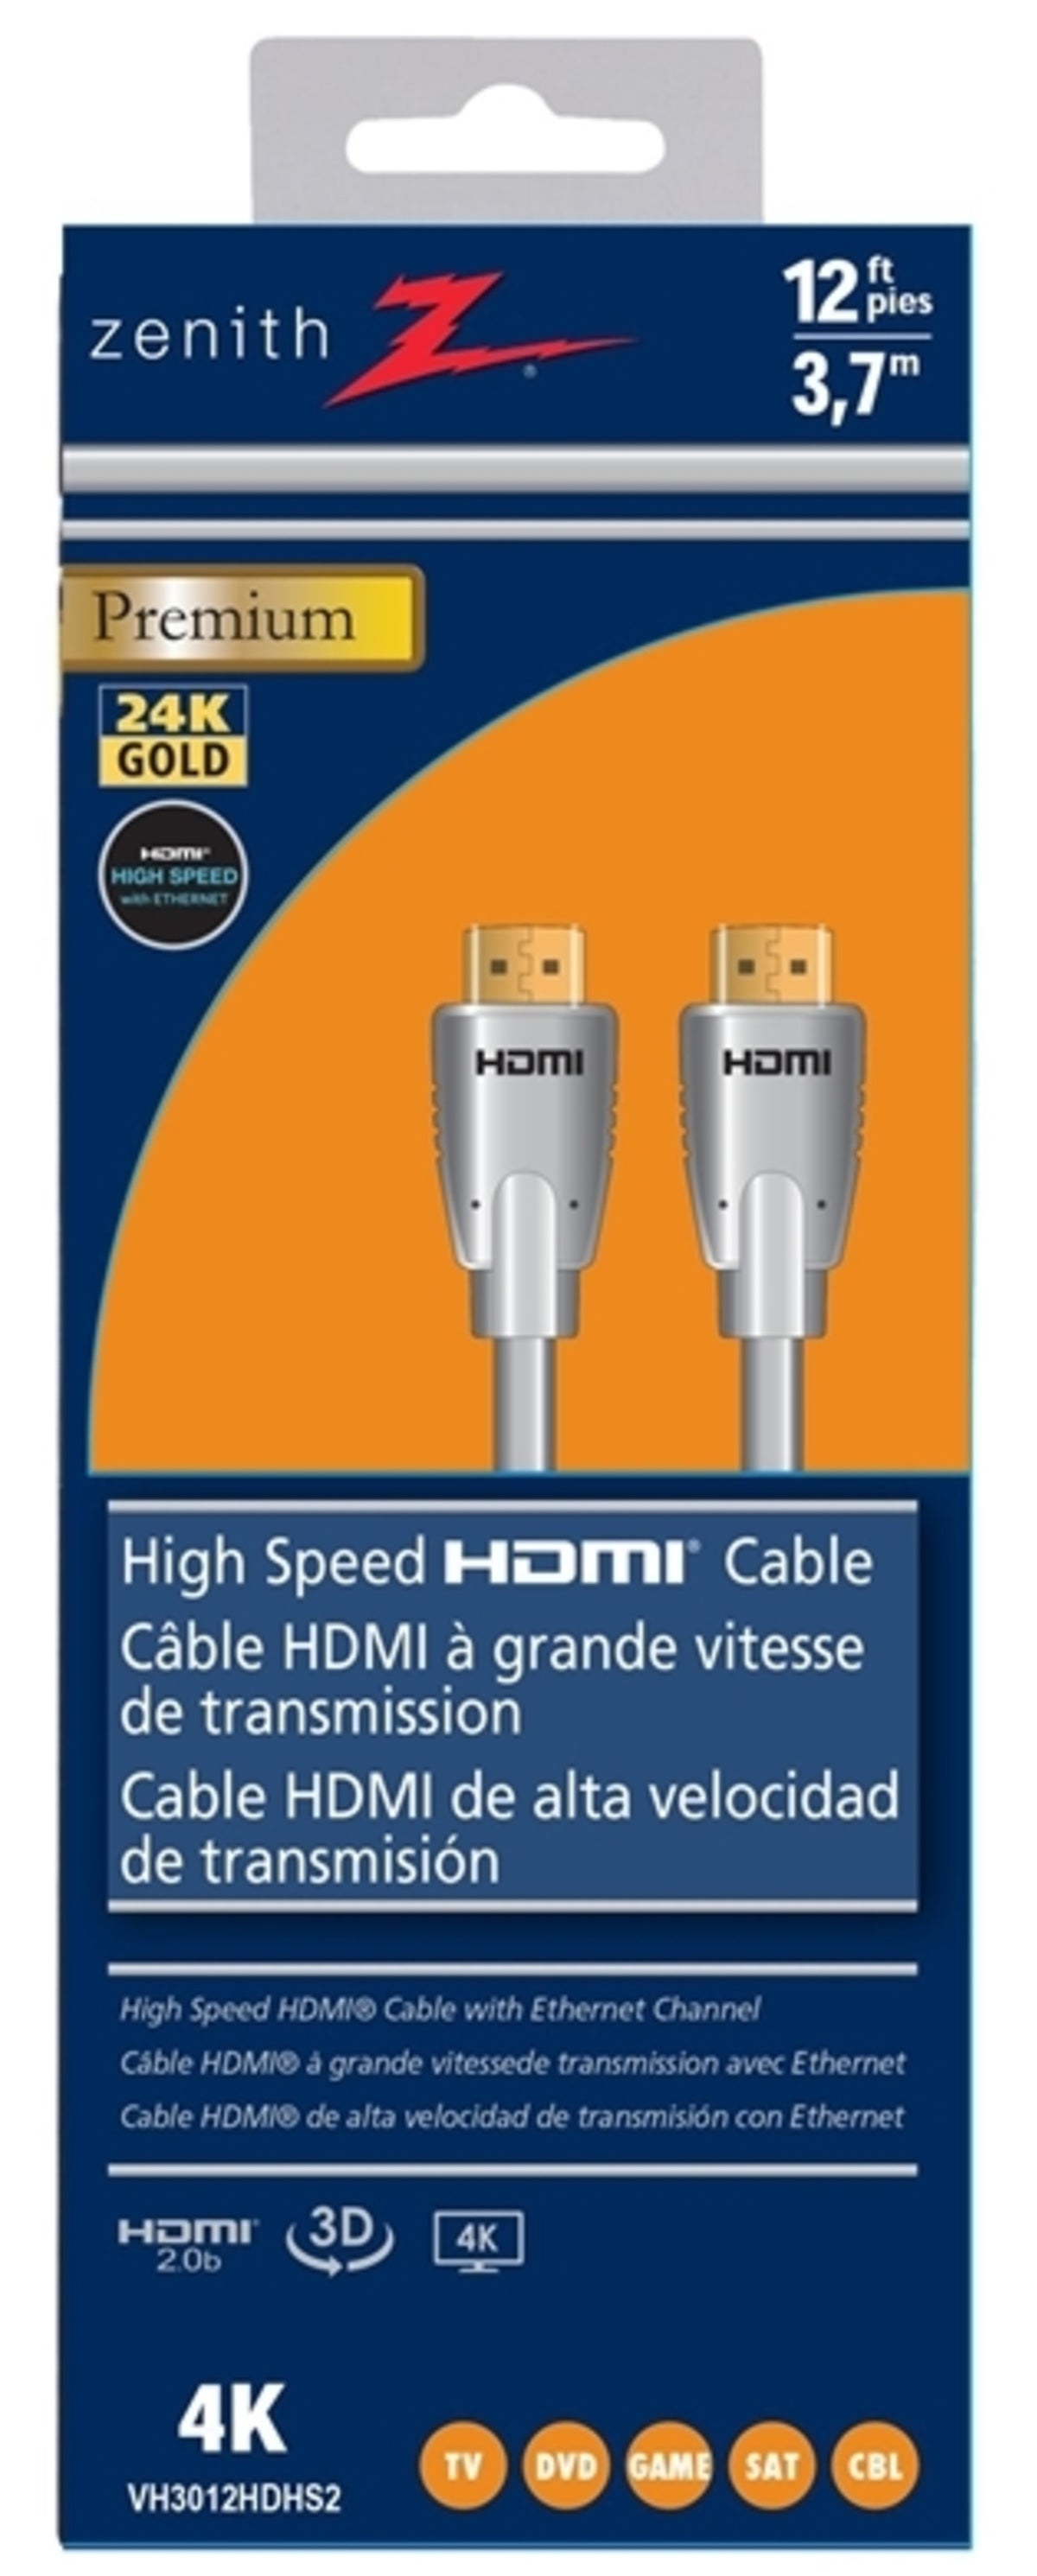 Zenith VH3012HDHS2 High Speed HDMI Cable, 12'